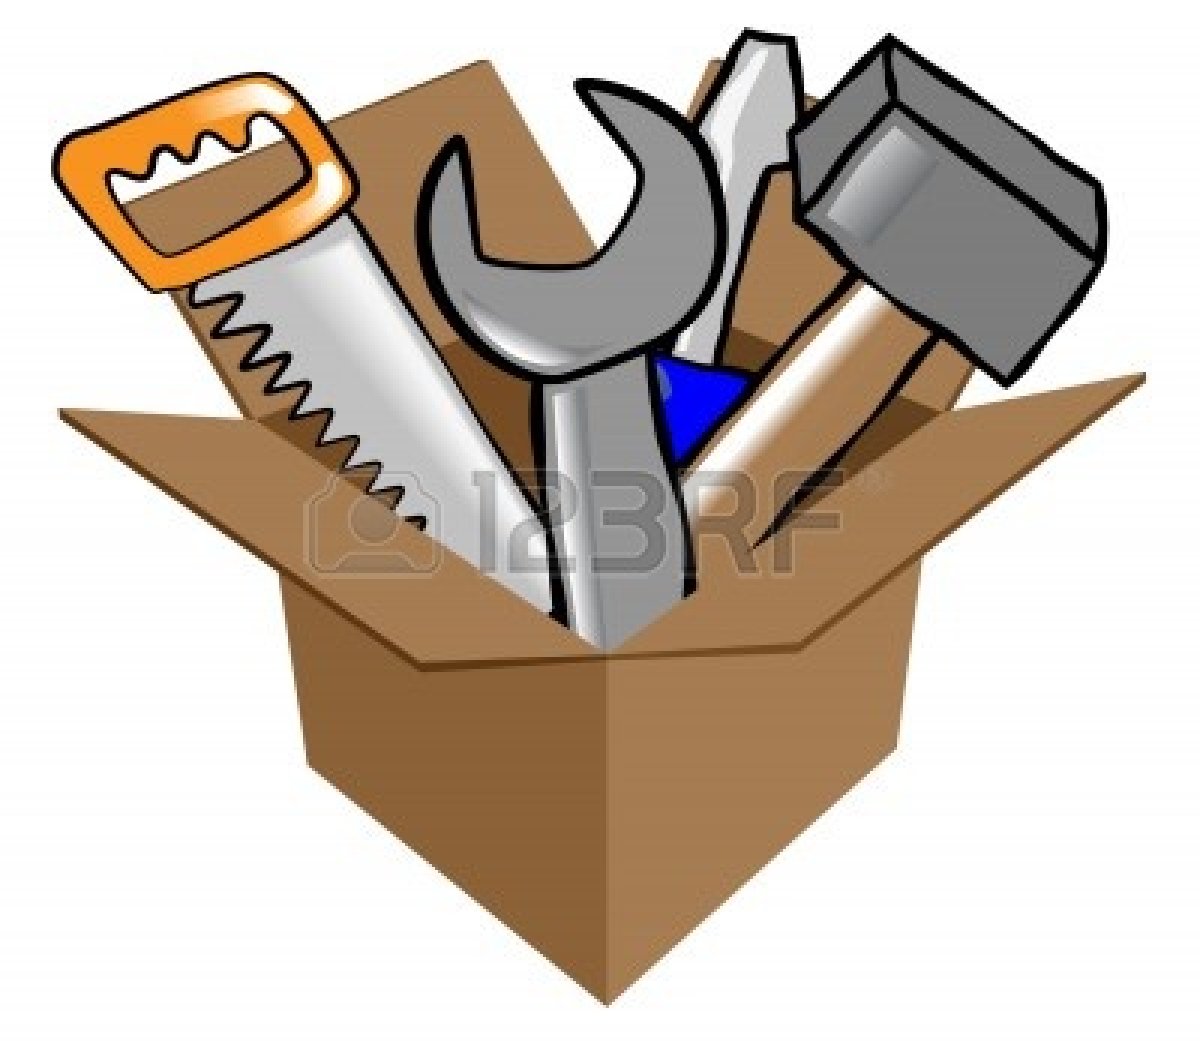 Carpentry Clip Art Carpentry Stock Illustrations Cliparts And Royalty